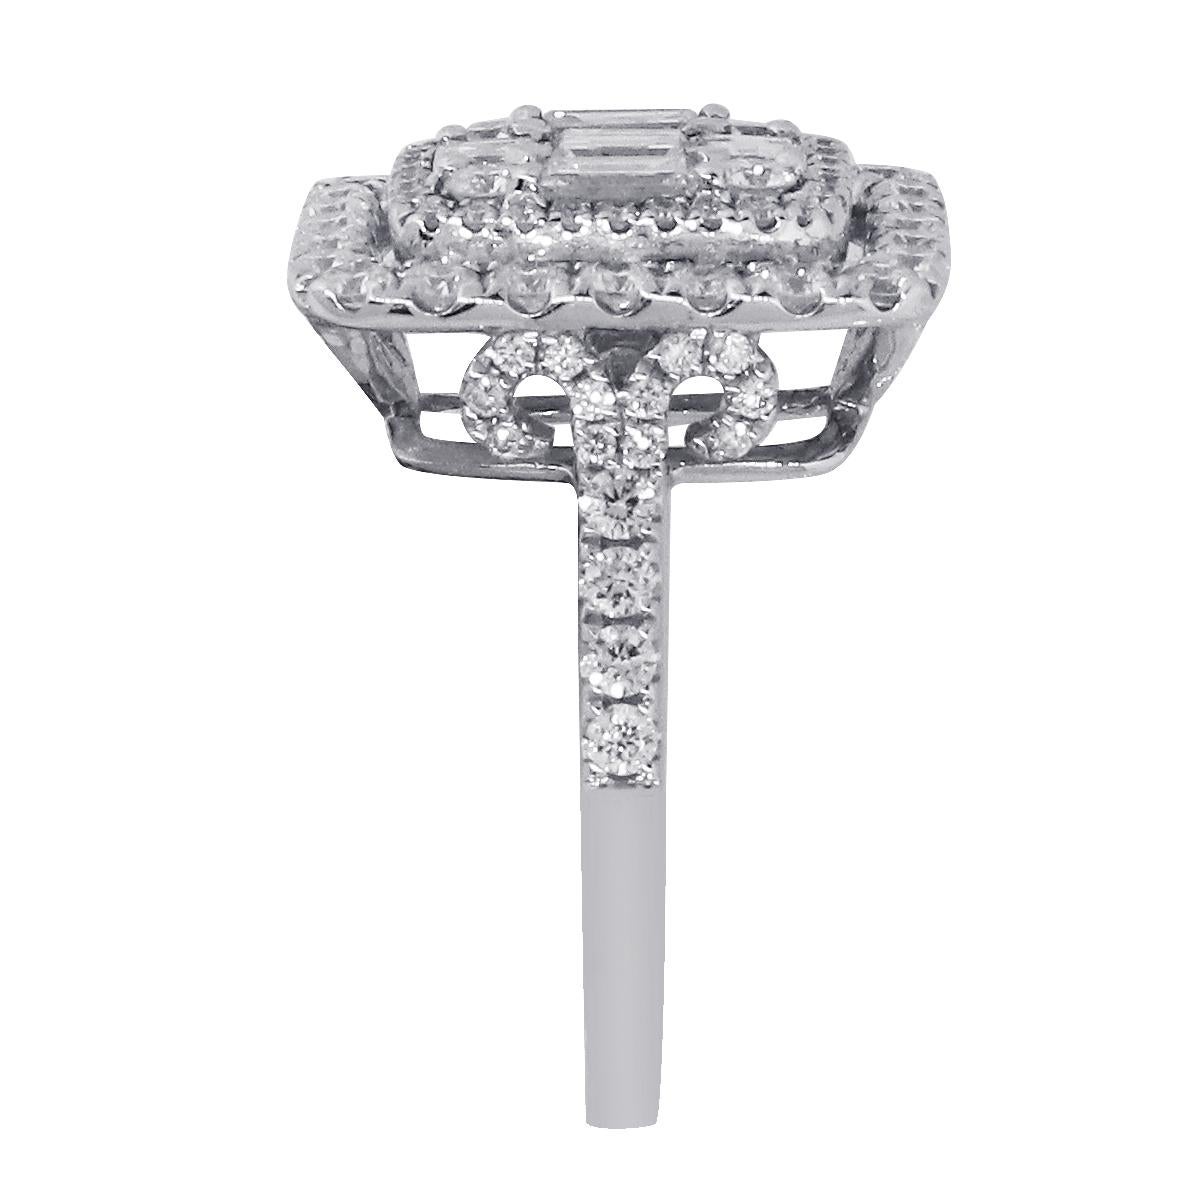 Material: 18k White Gold 
Diamond Details: (Total of 116 diamonds) Approximately 1.44ctw round brilliant diamonds. (Total of 5 diamonds) that are Approximately 1.04ctw Baguette cut. Diamonds are G/H in color and VS in clarity.
Ring Size: 6.5
Total